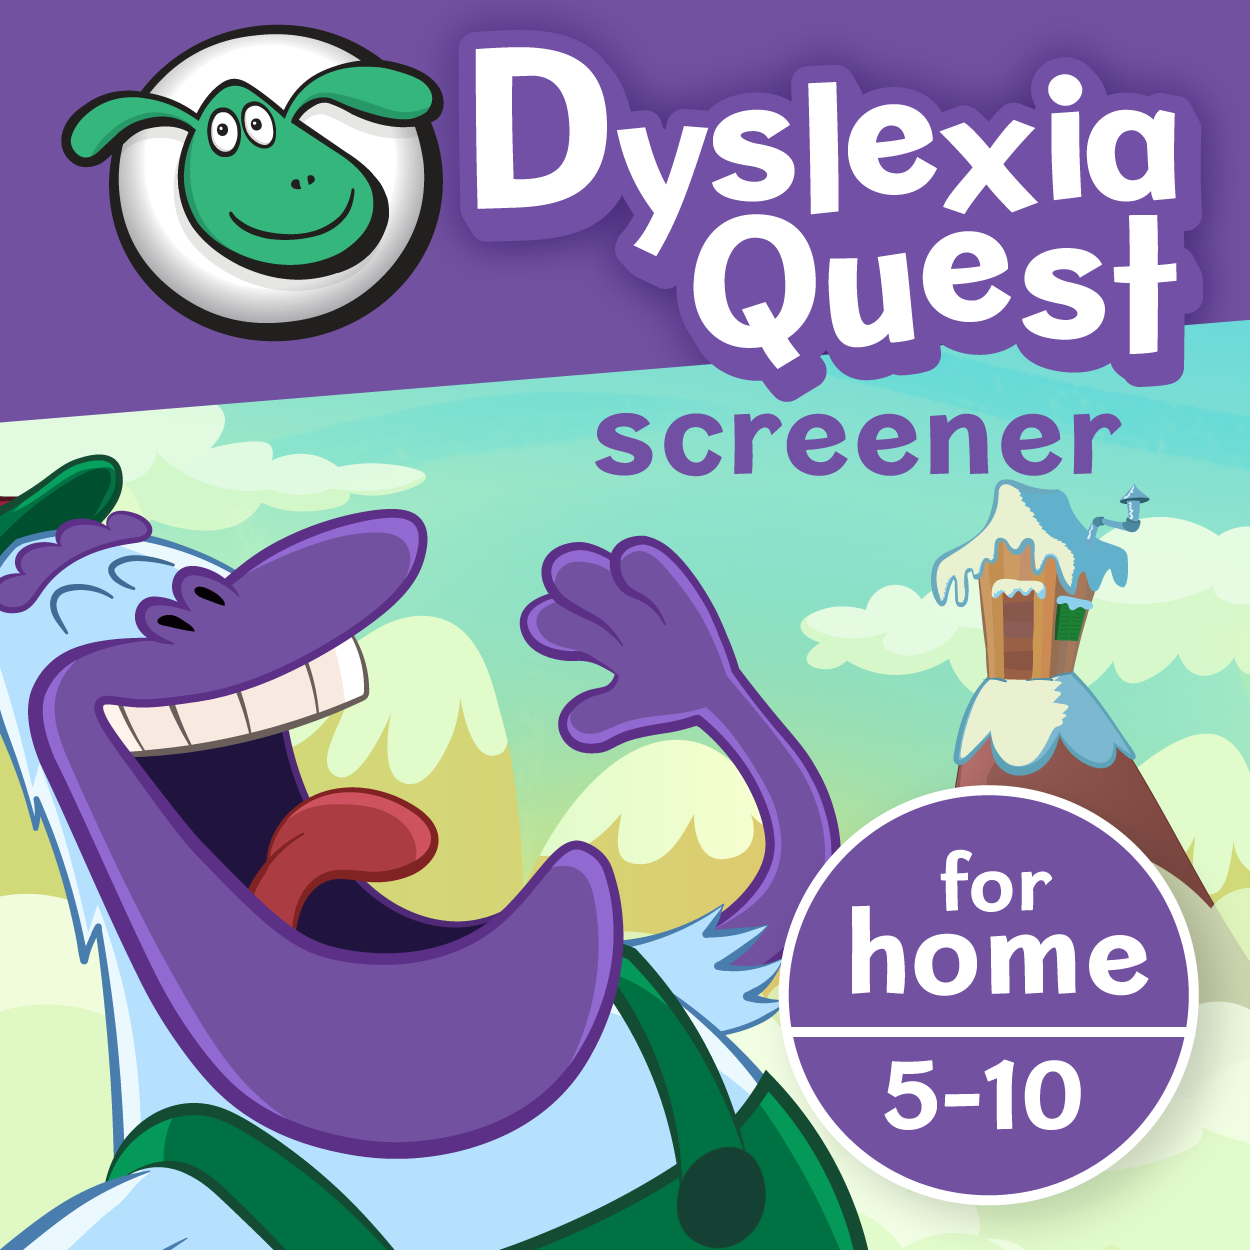 Dyslexia Quest Screener for home